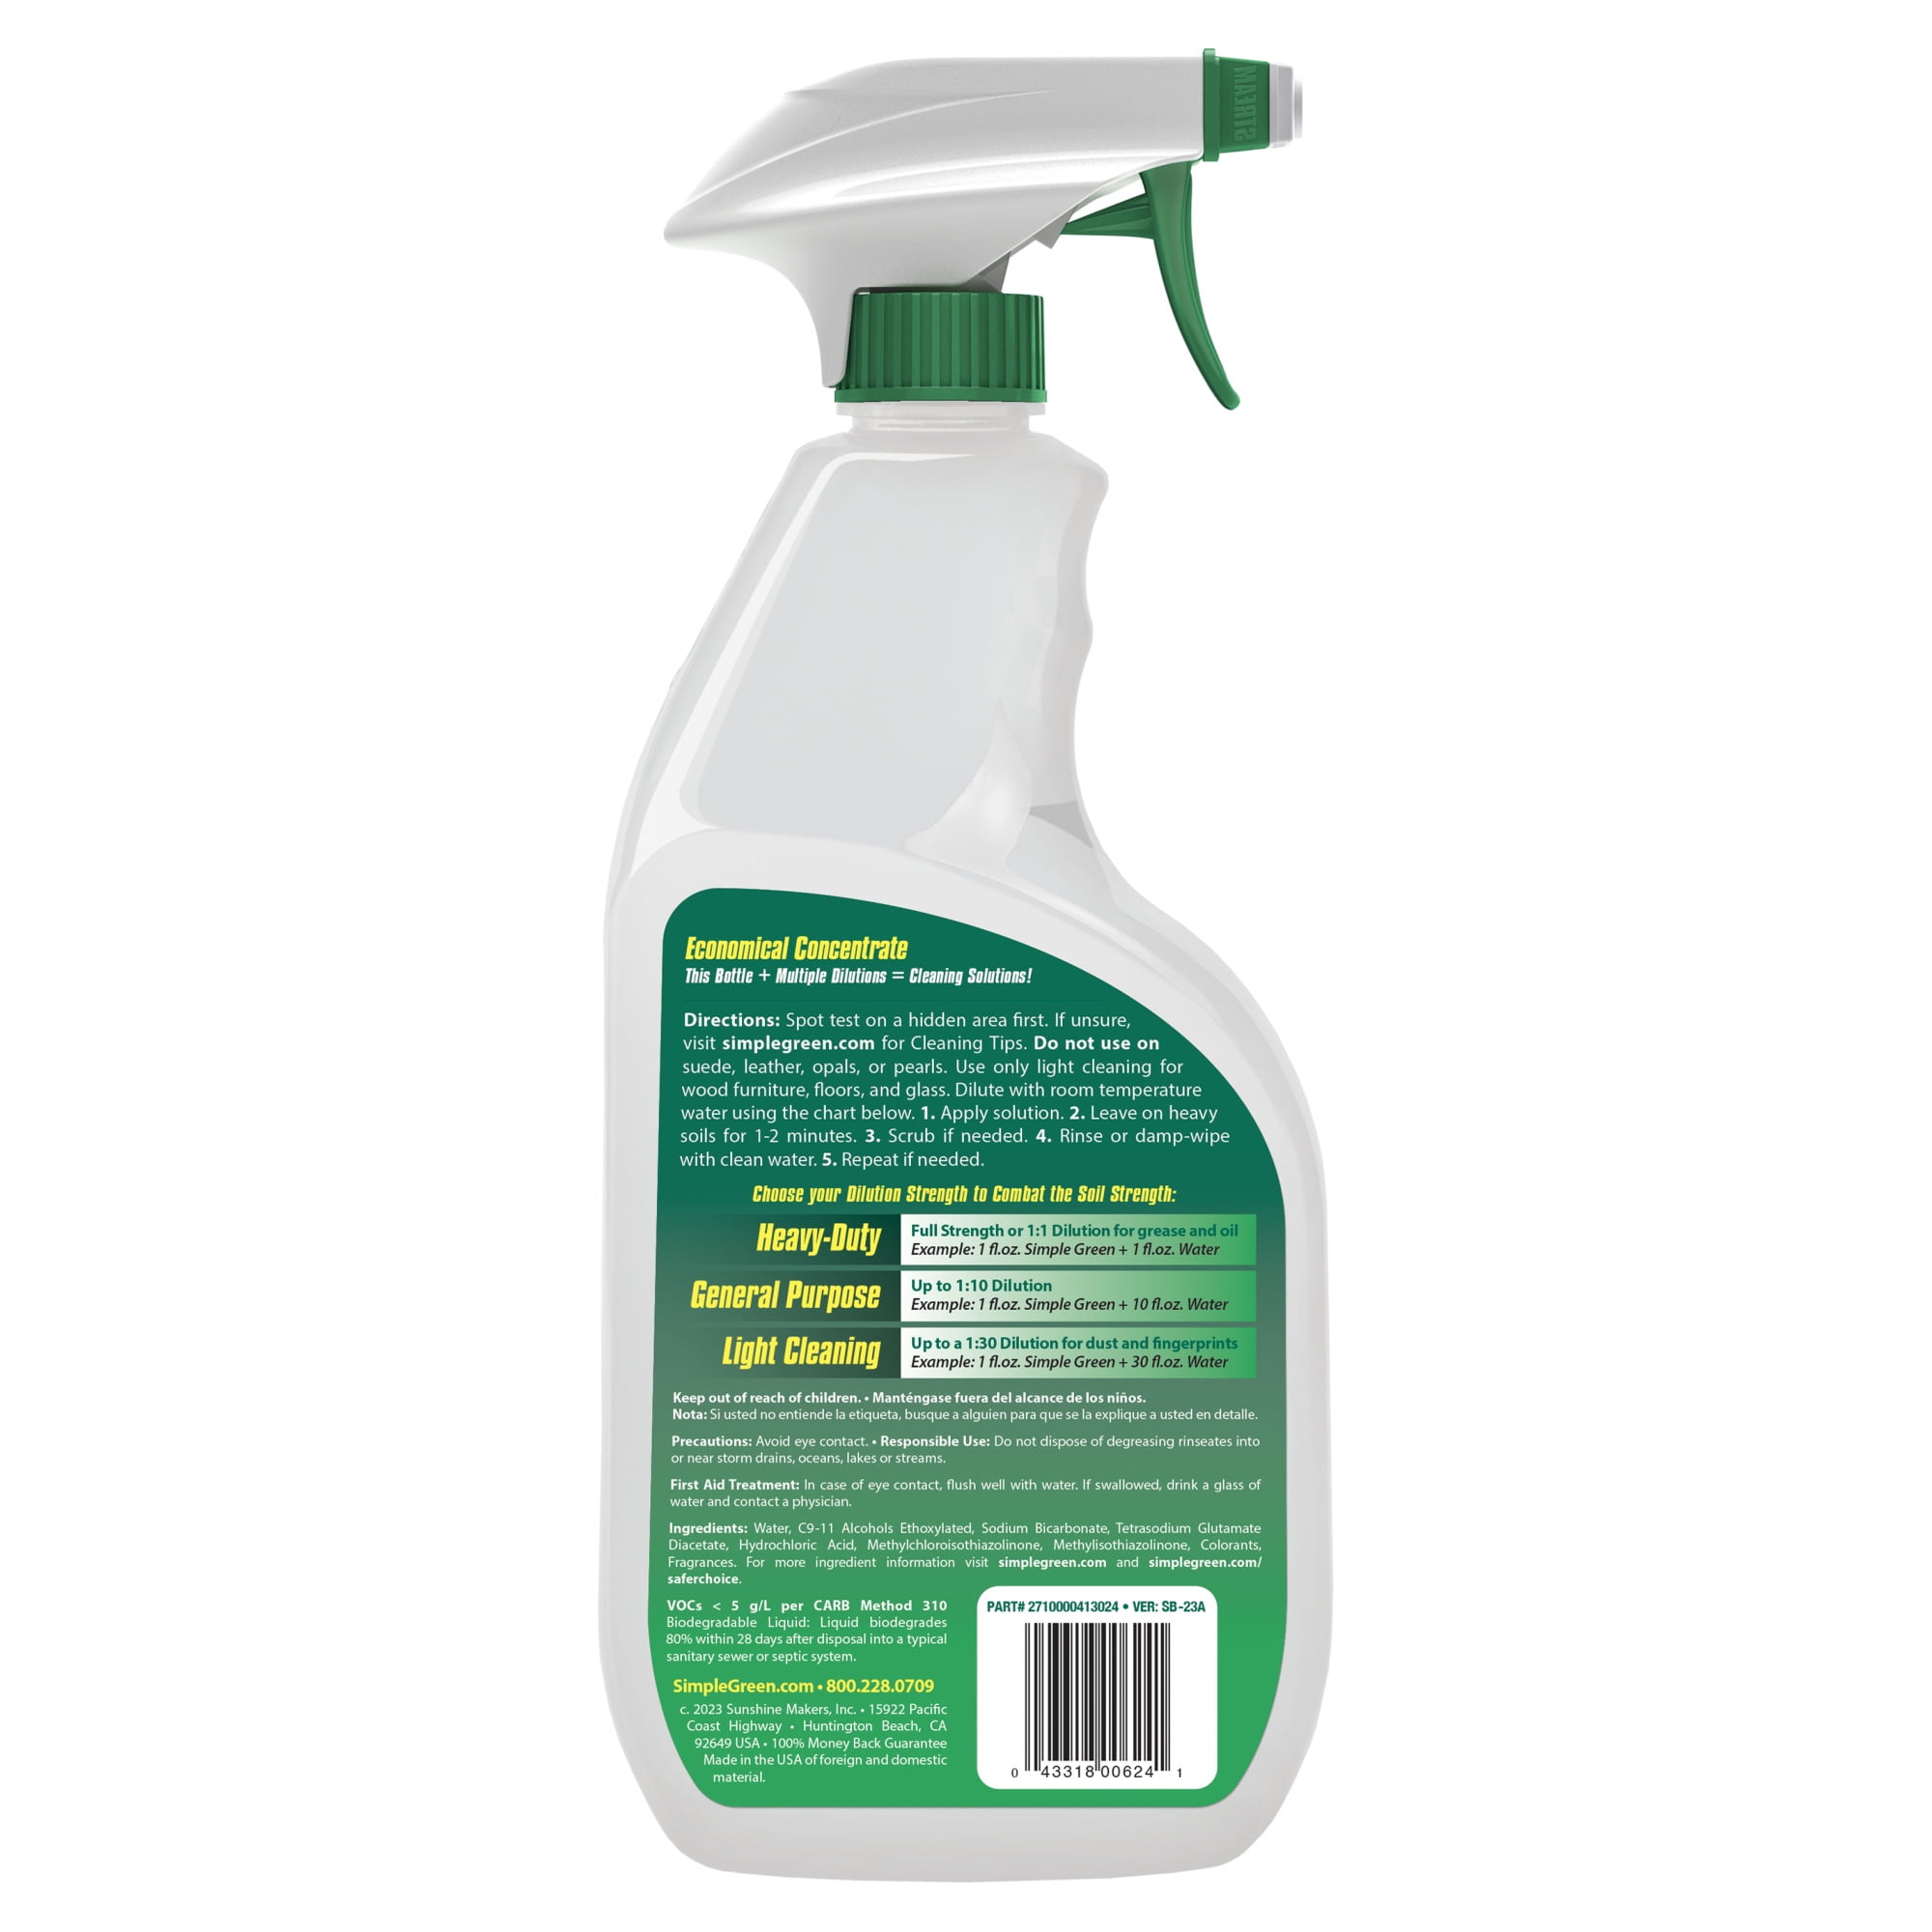  Simply Kleen USA Professional All Purpose Cleaner and